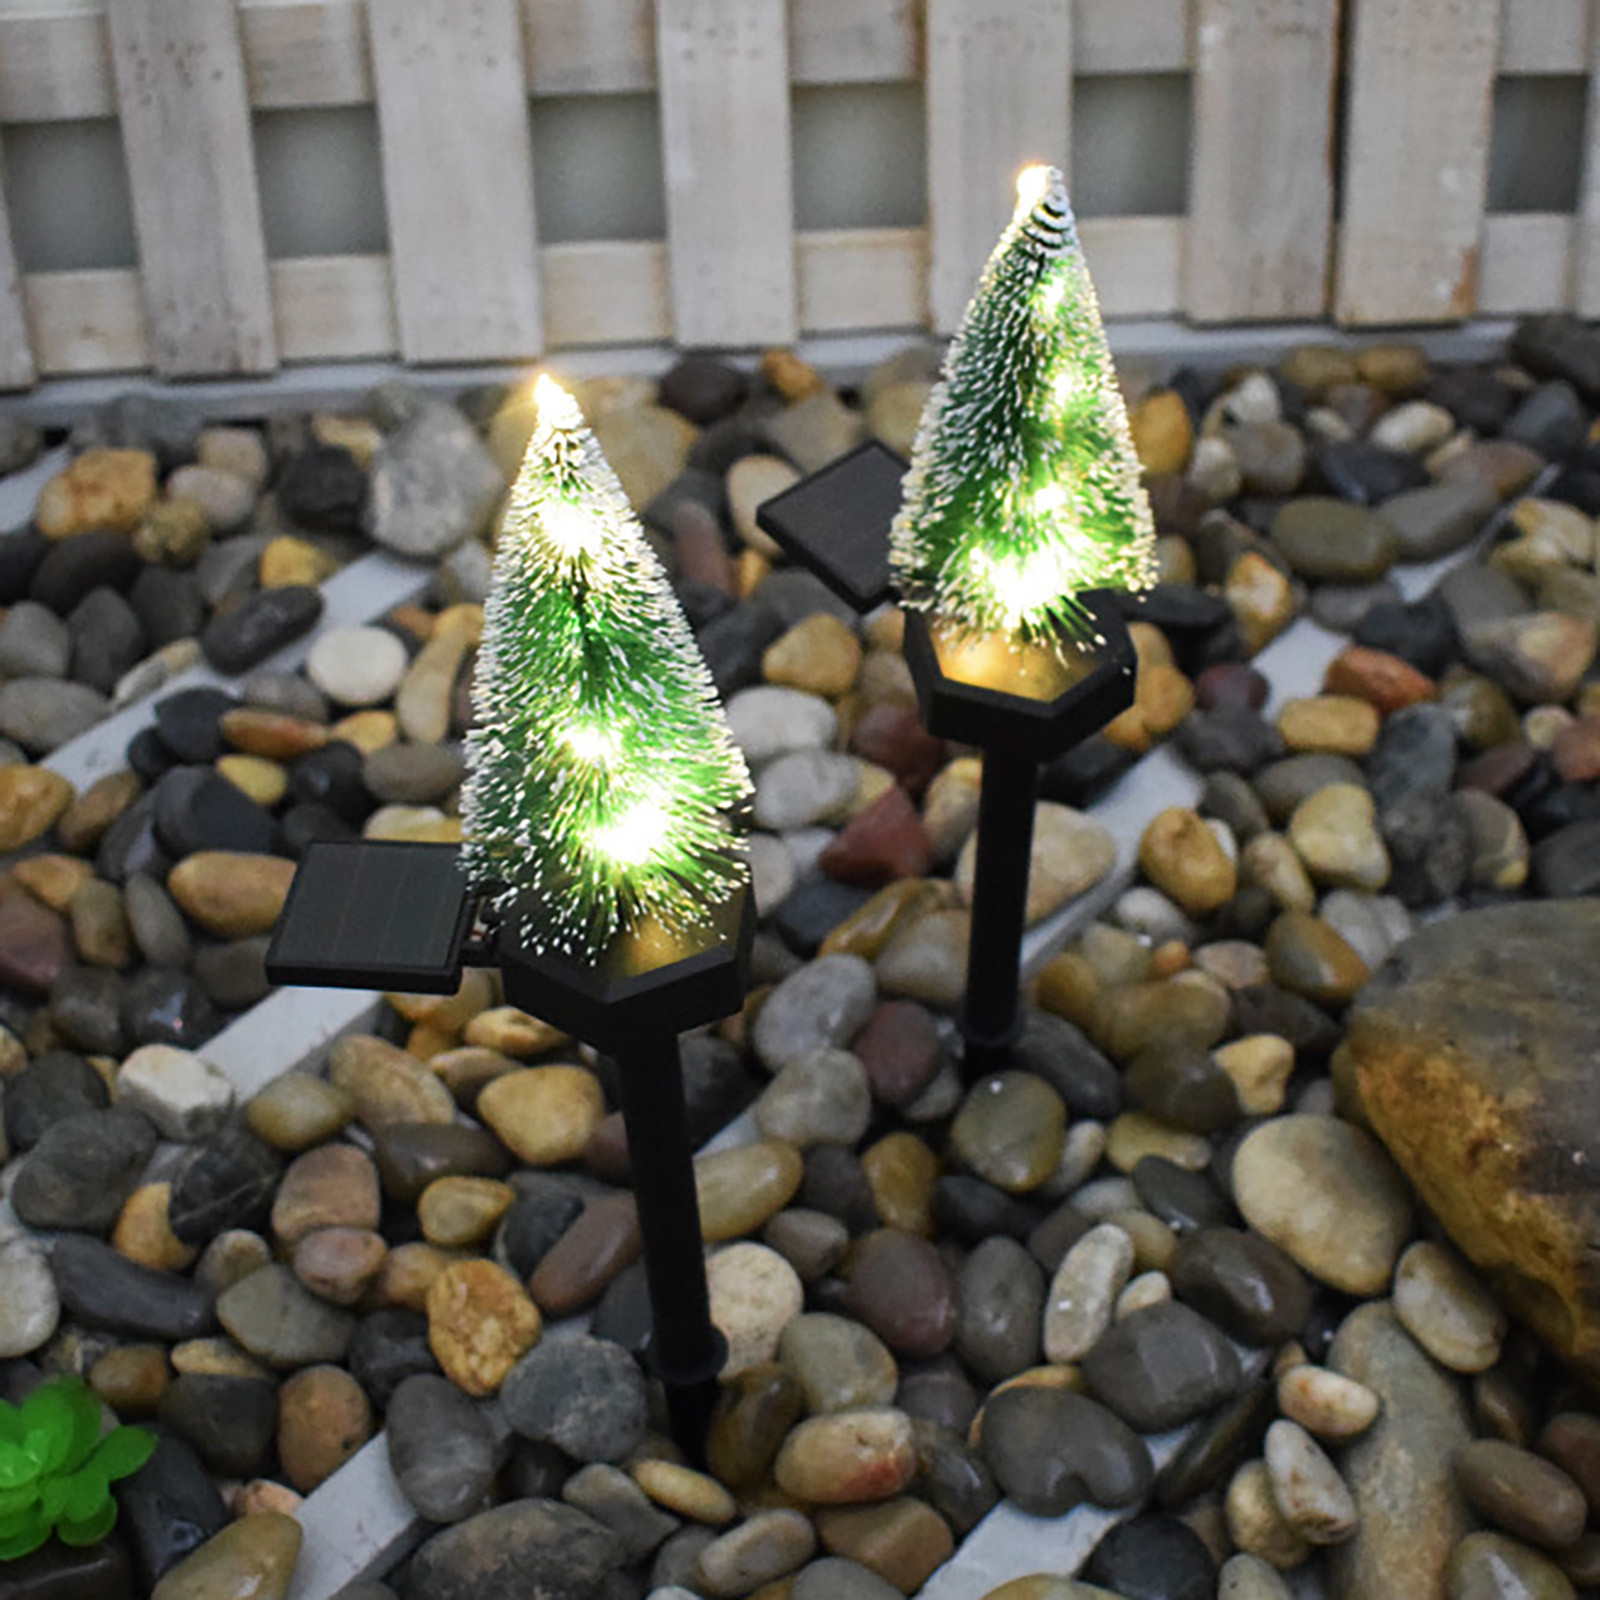 Christmas-Tree-Lights-Led-Solar-Light-For-Garden-Decoration-Lawn-Lamp-Outdoor-Home-Pathway-Bulb-Wate-1918433-10